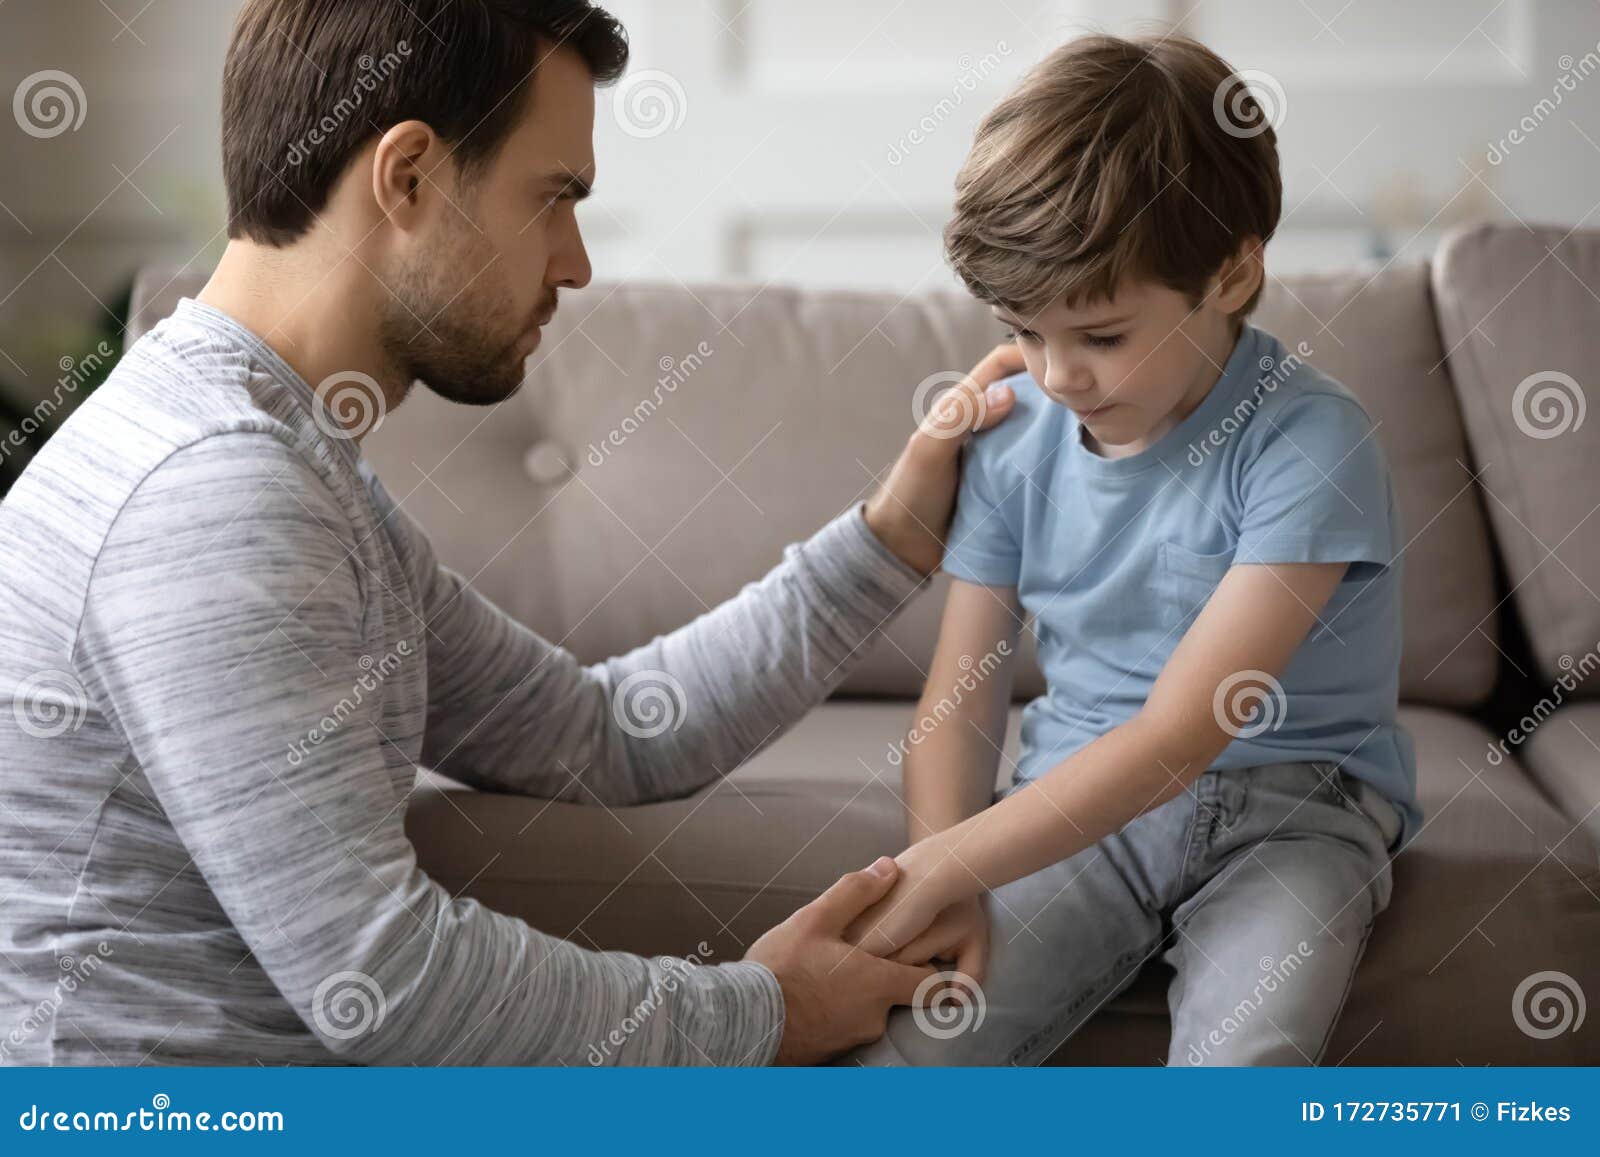 kind daddy supporting depressed offended small boy.